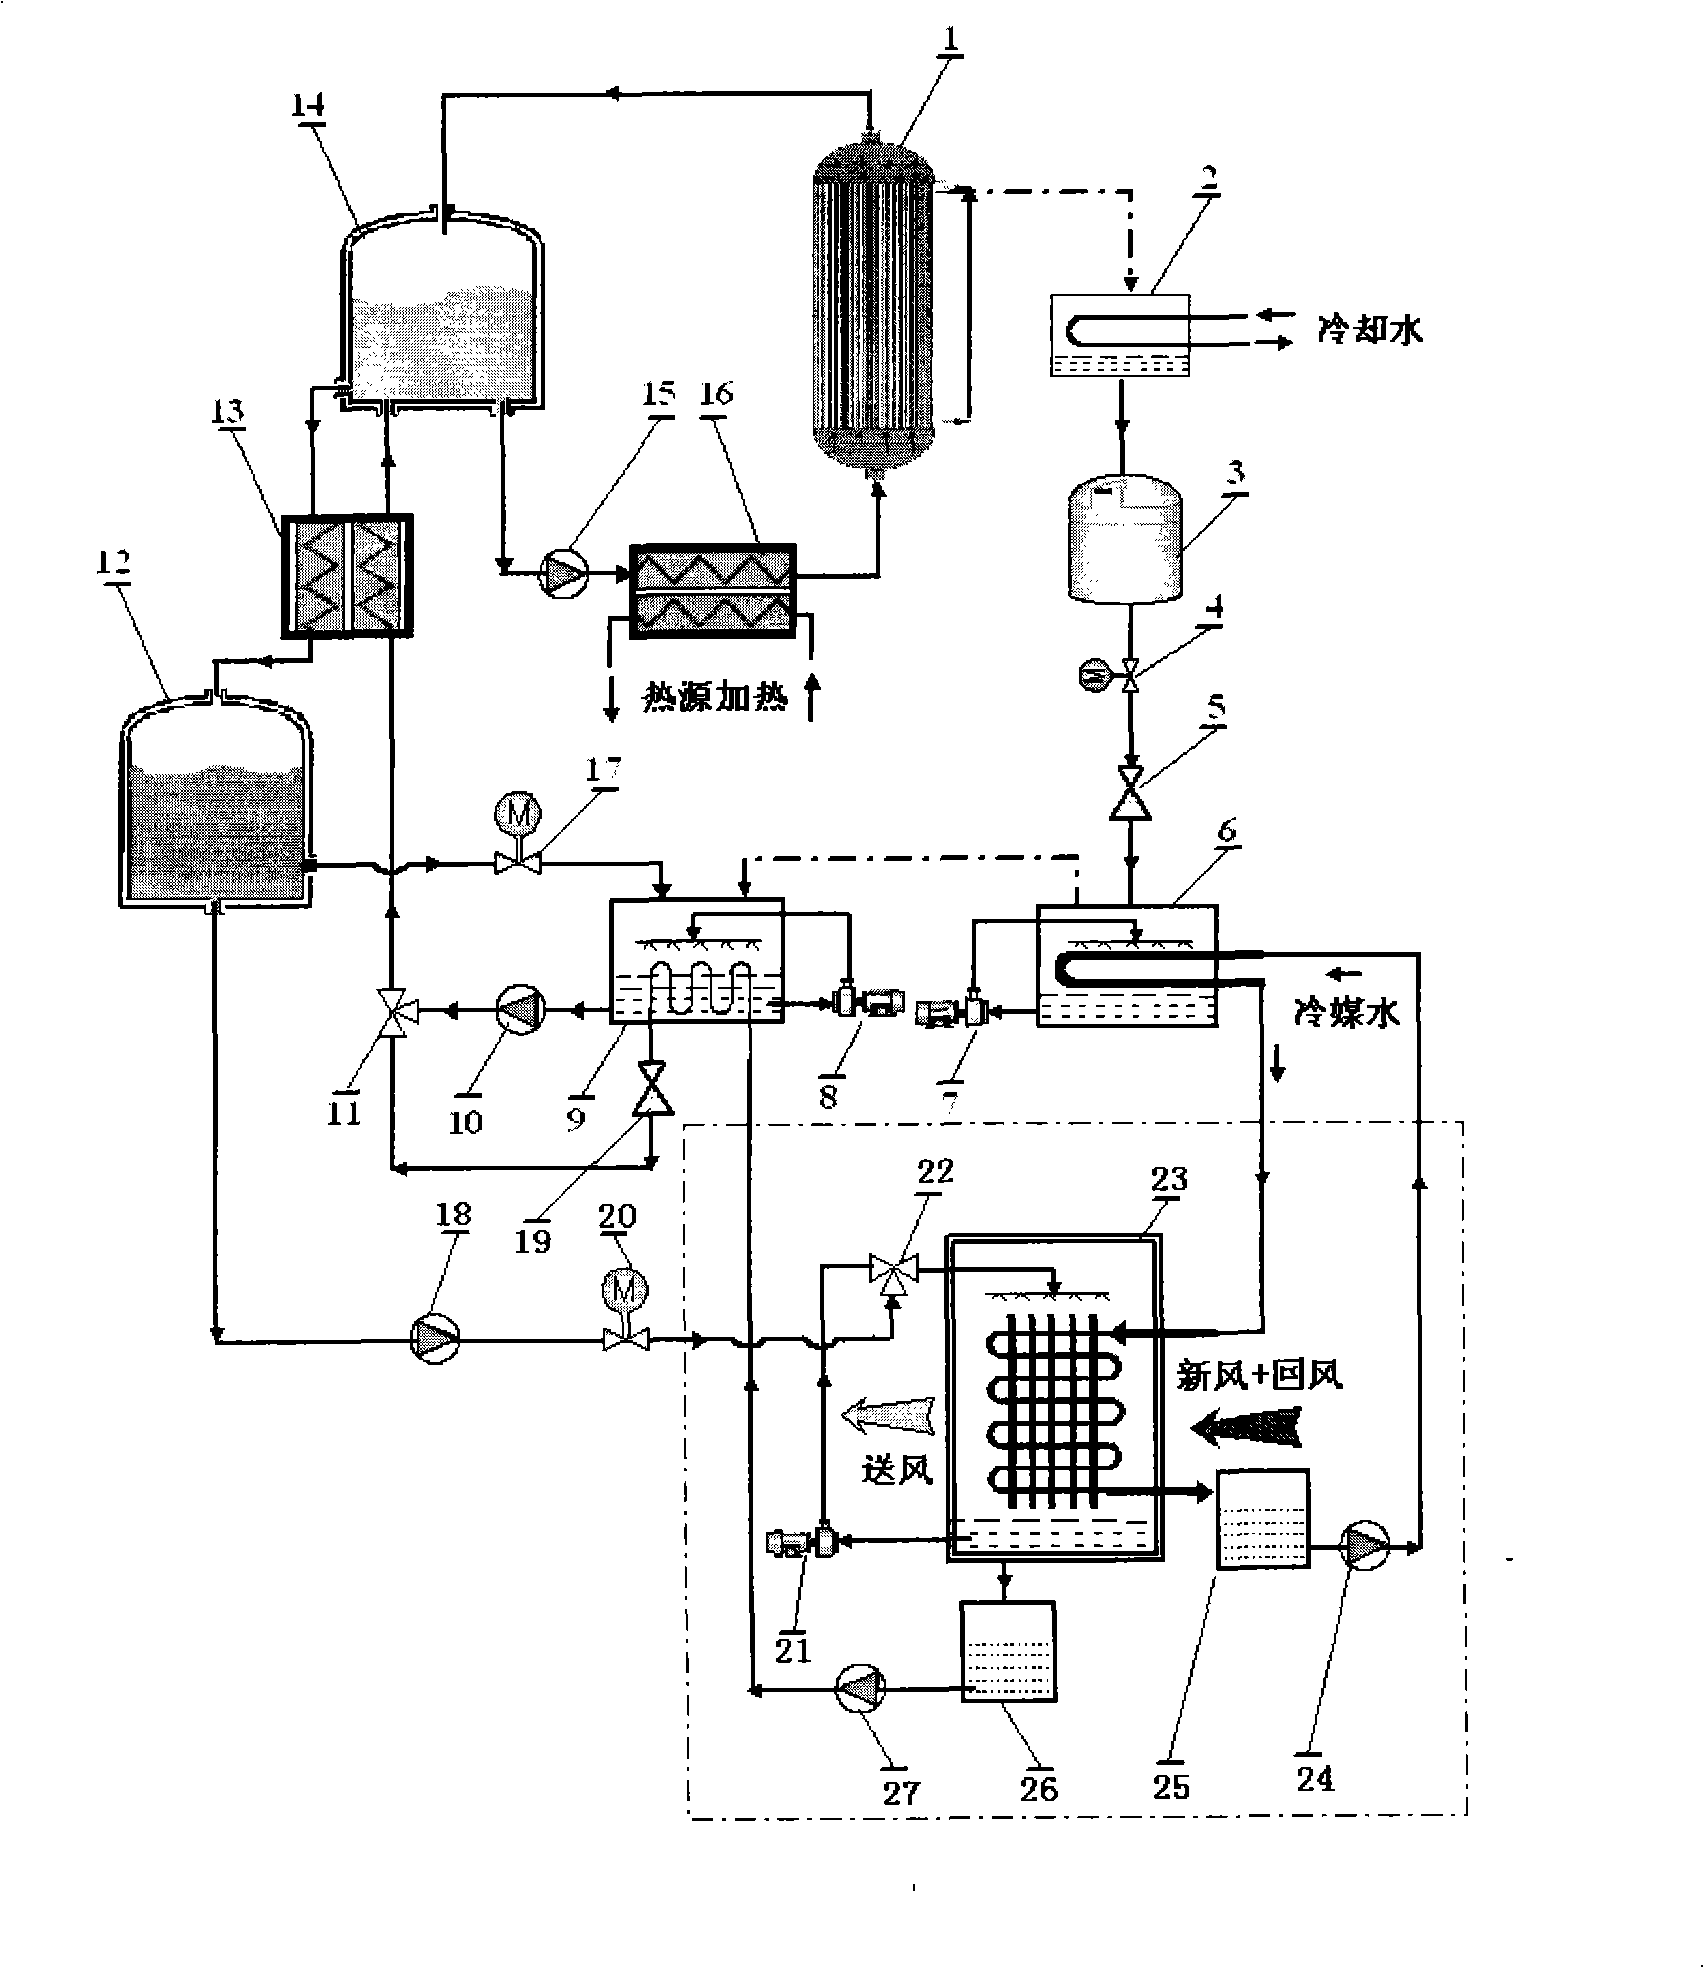 Temperature and humidity independent control air conditioner system based on film distillation technology